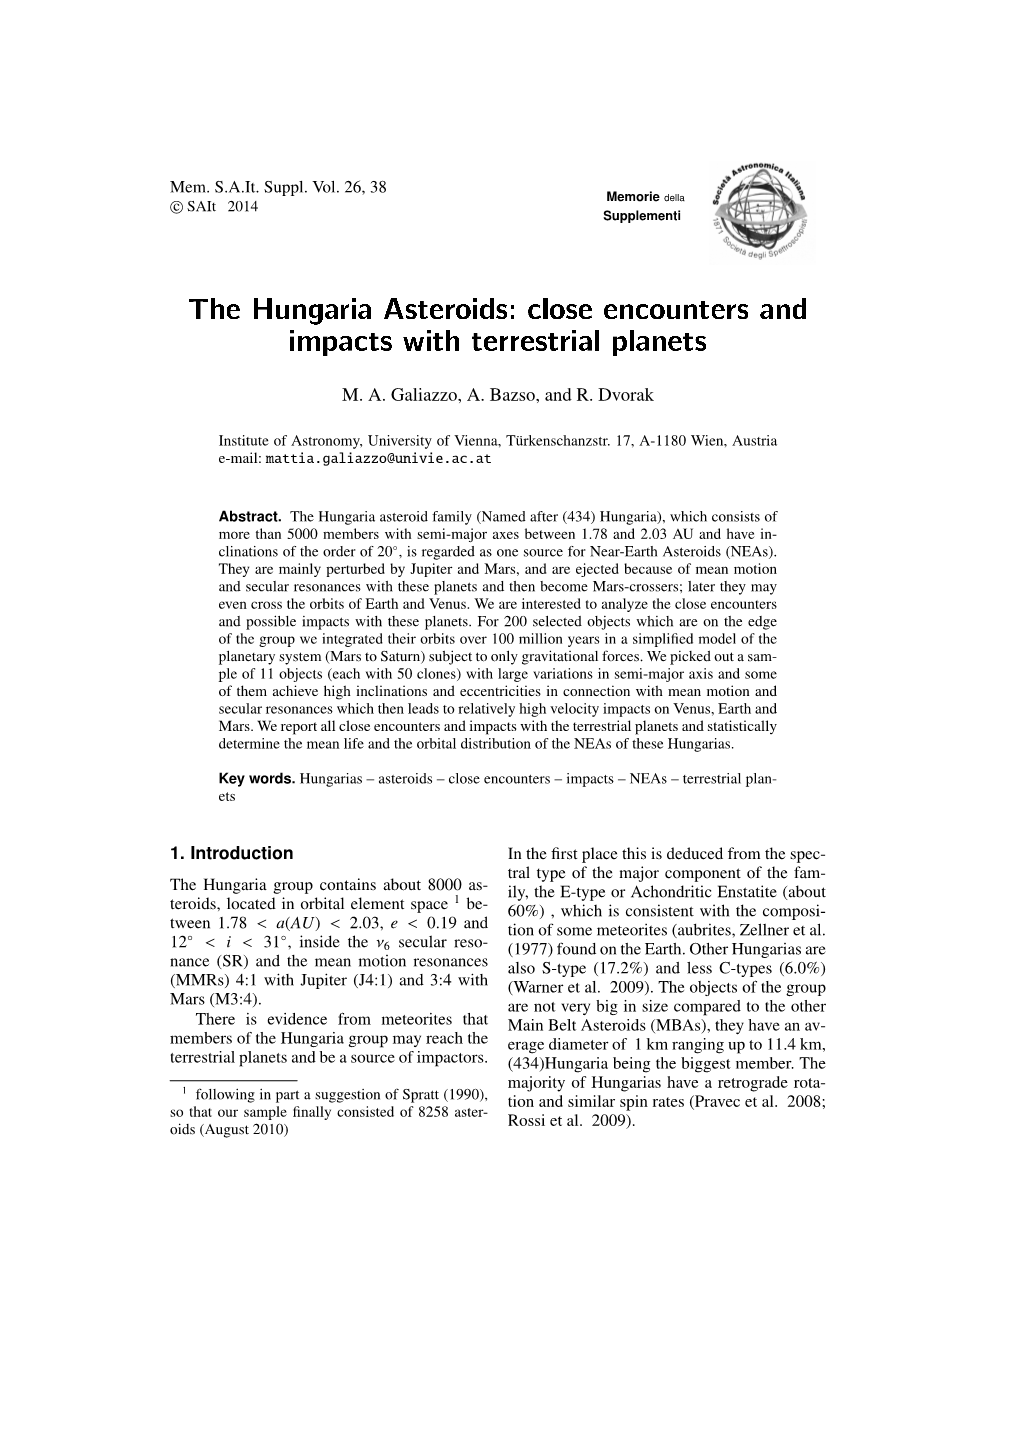 The Hungaria Asteroids: Close Encounters and Impacts with Terrestrial Planets